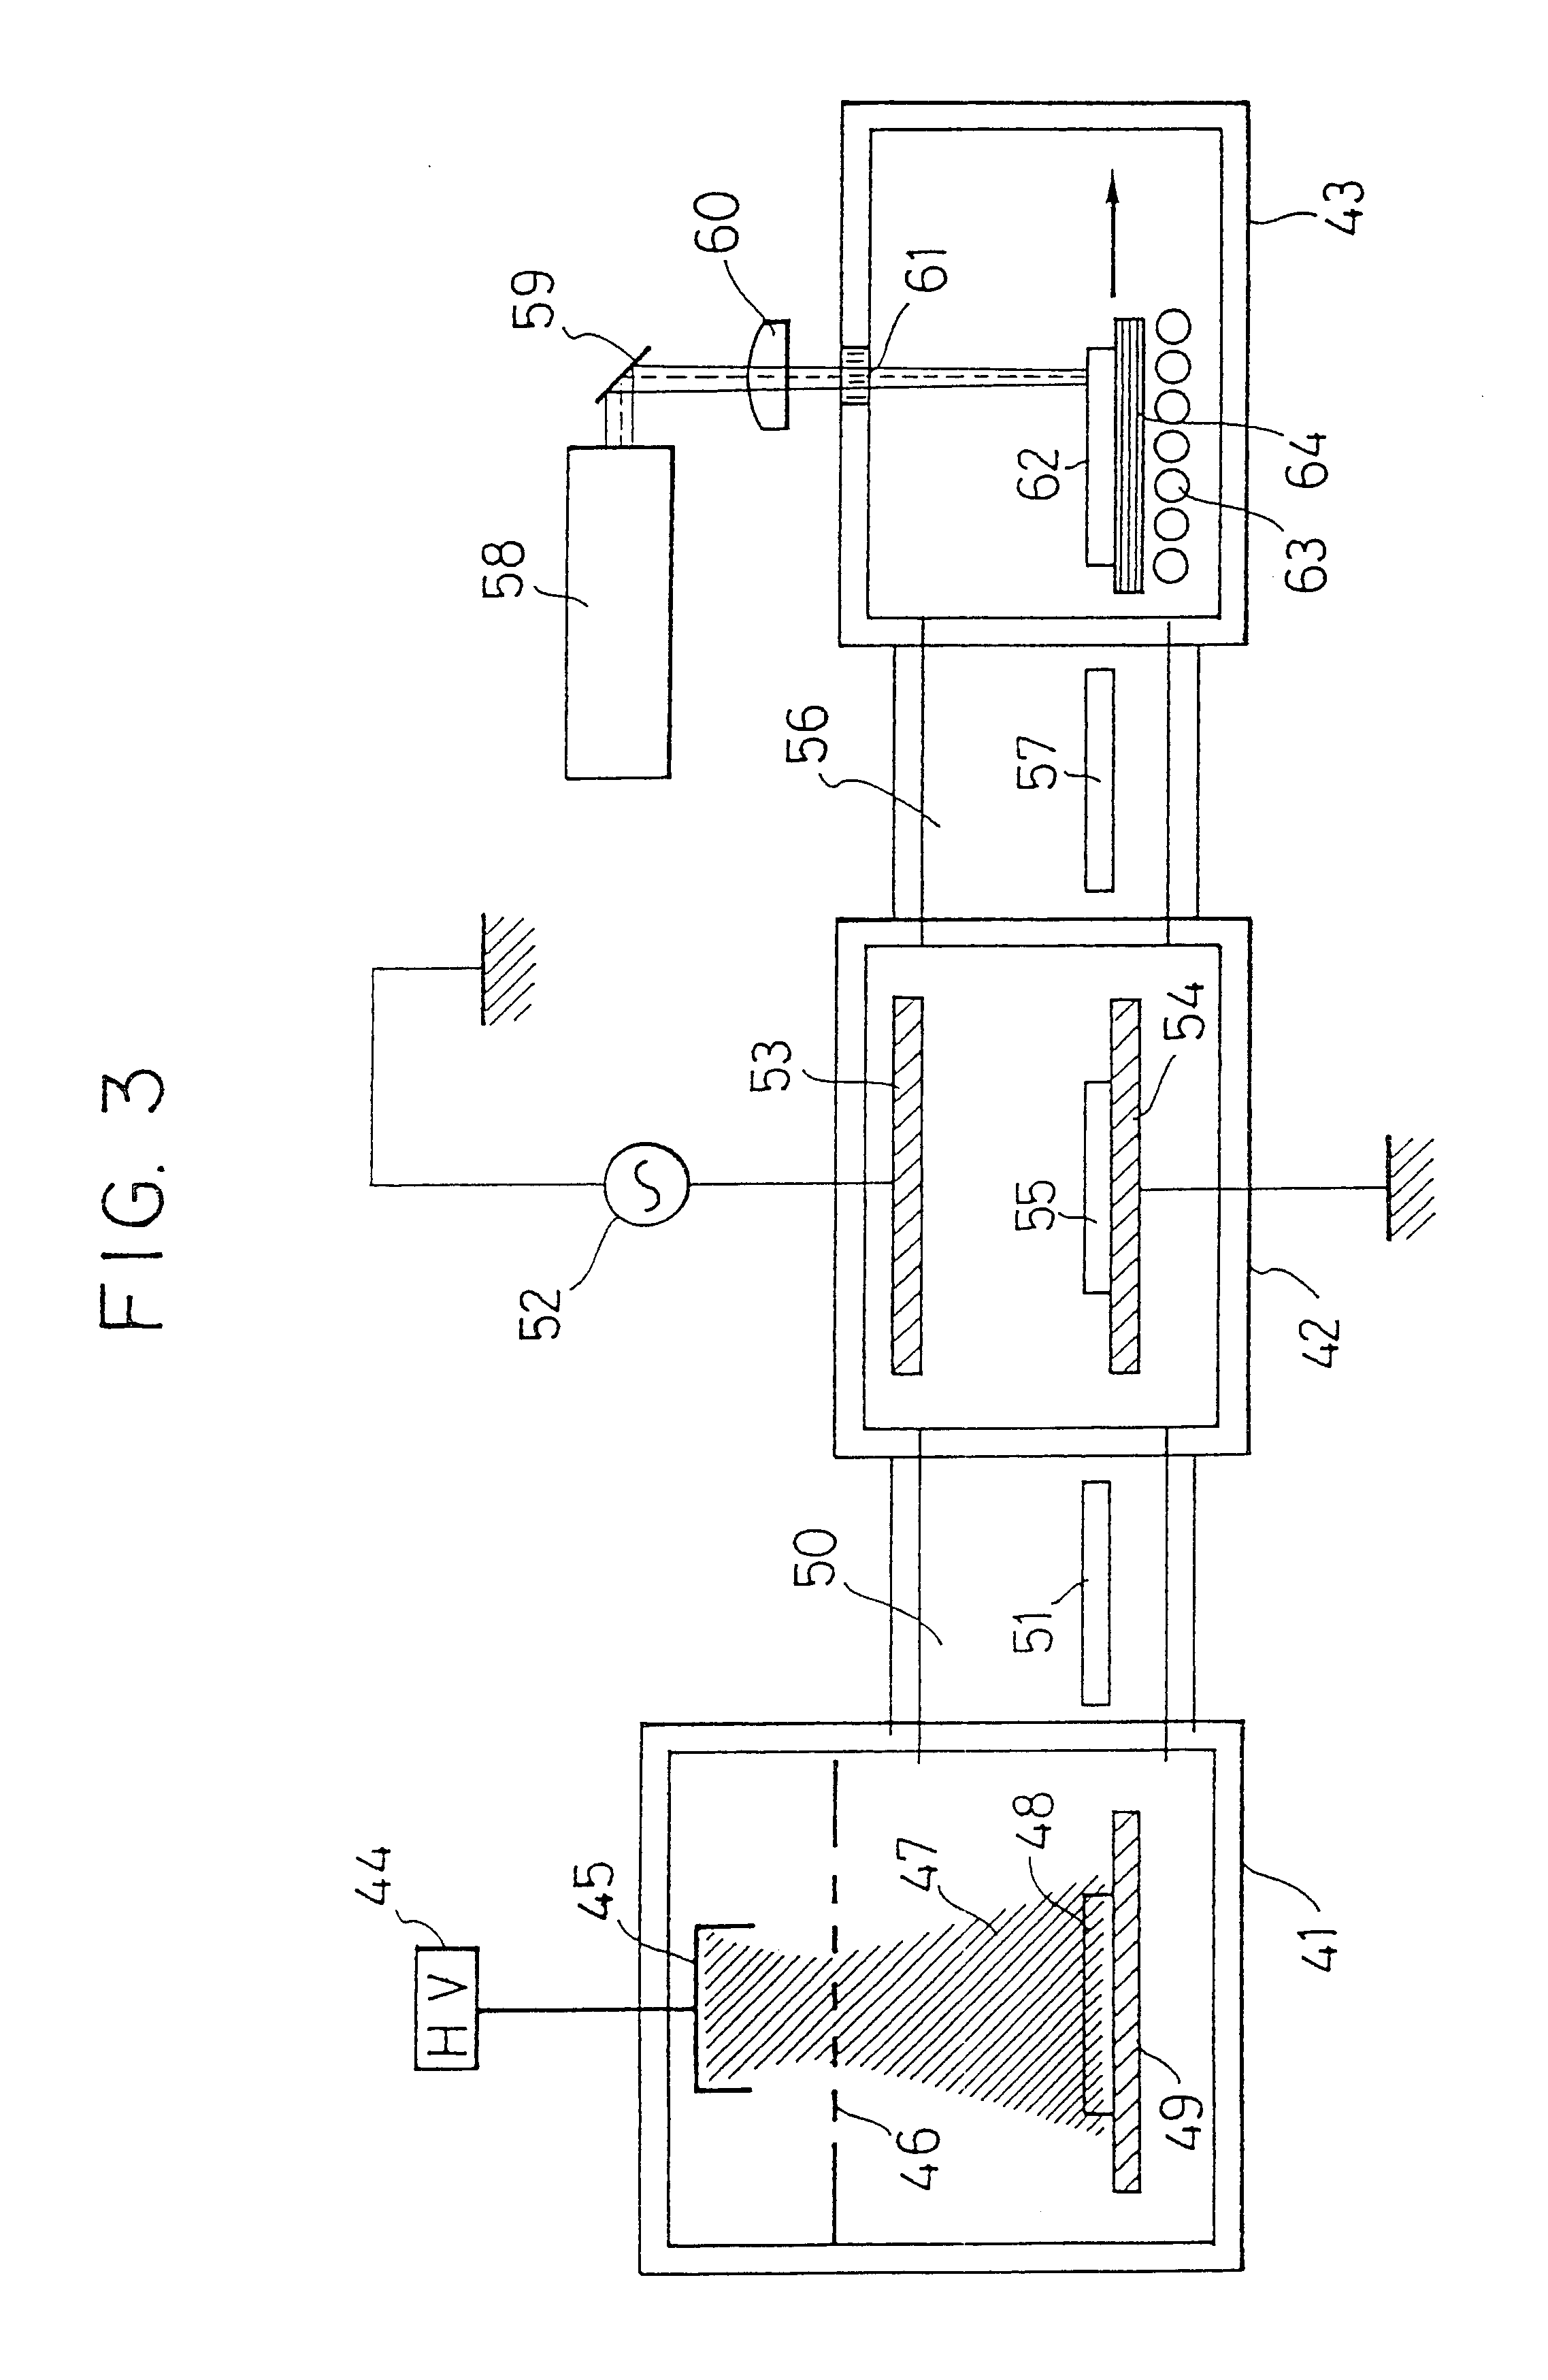 Apparatus for processing a semiconductor